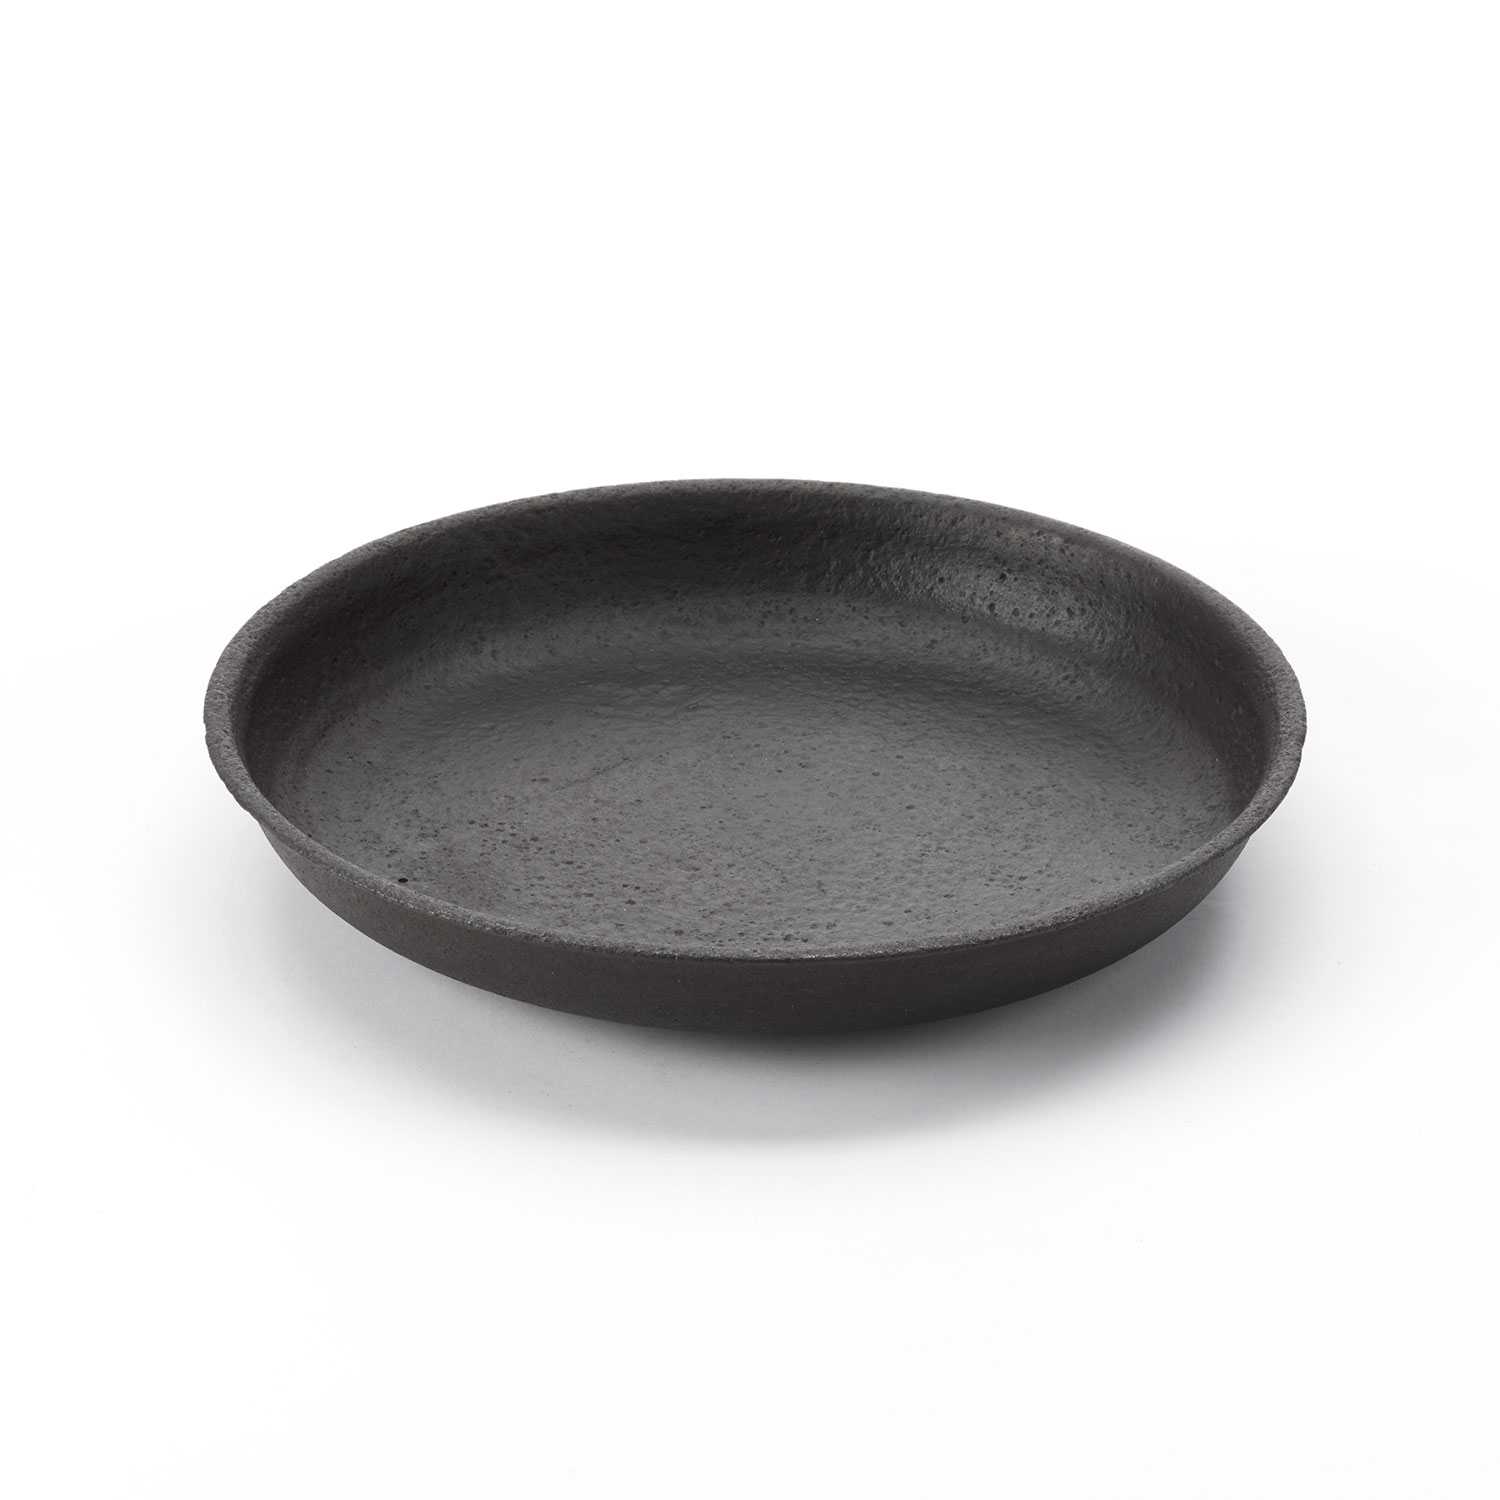 Cast Iron D (Vintage Footed Bowl)  Rental for Photography at Noho